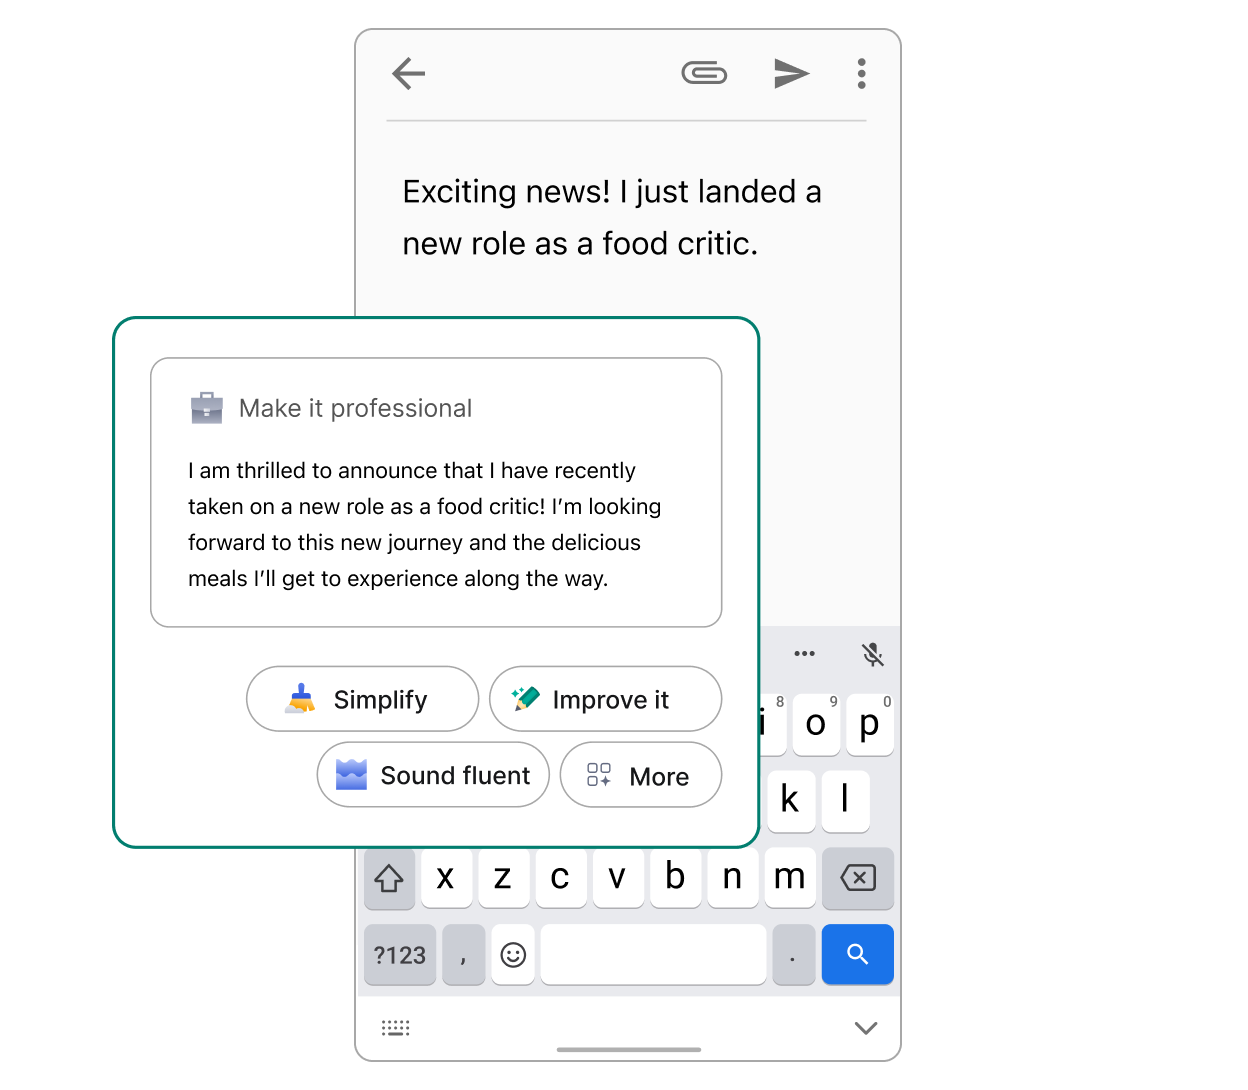 Grammarly's generative AI can rewrite your text on mobile